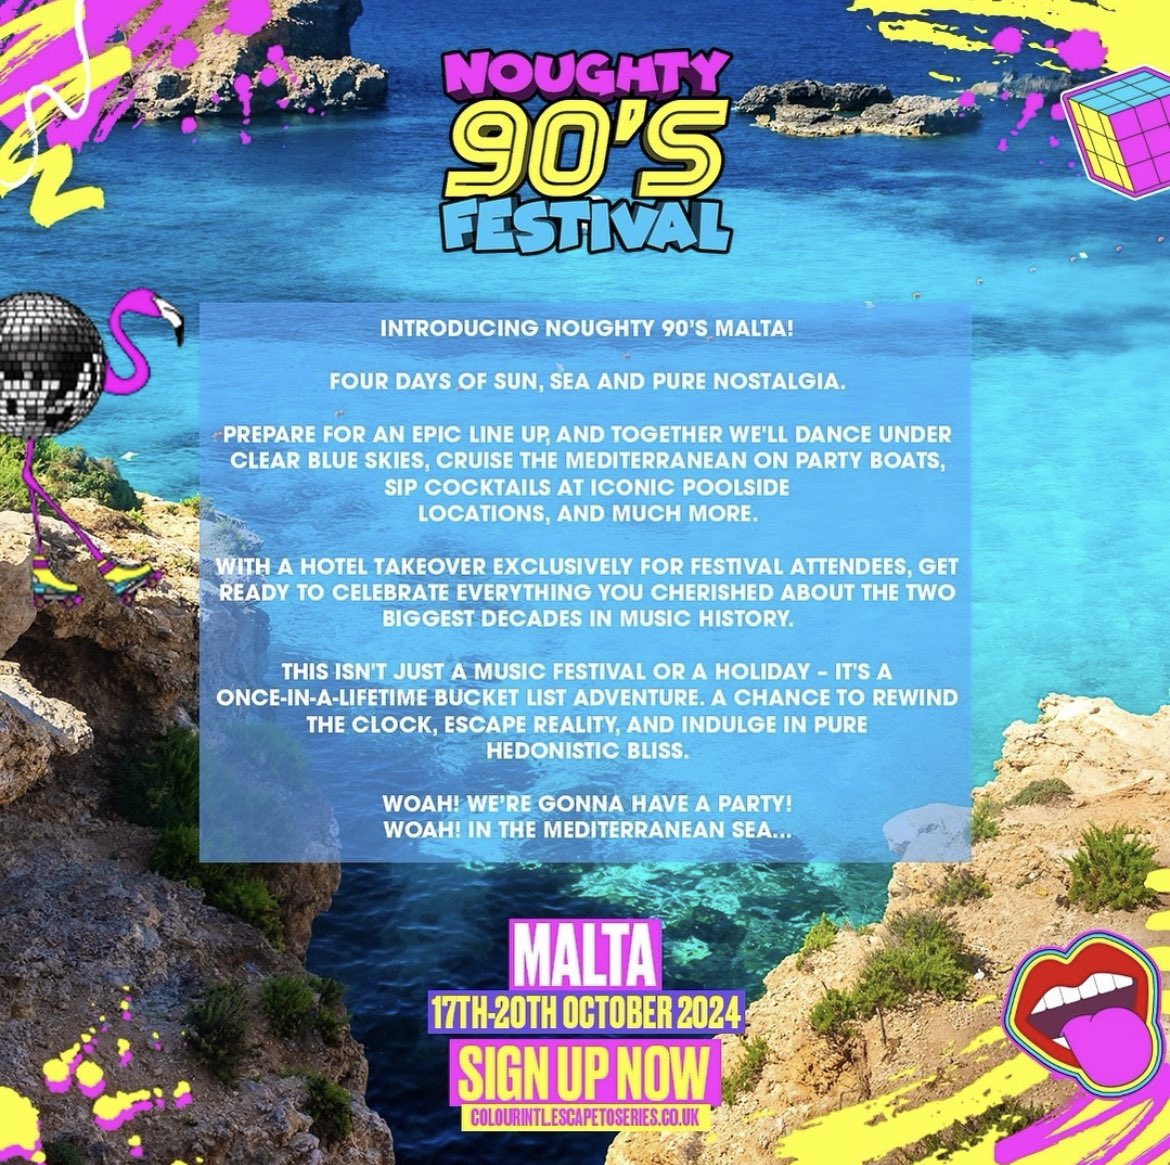 NOUGHTY 90s MALTA 🇲🇹 17TH - 20TH OCTOBER 2024 ☀️ See you there ✈️ Sign up for more info + earlybird prices >> Link in Bio 🔗 Noughty90s.escapetoseries.co.uk